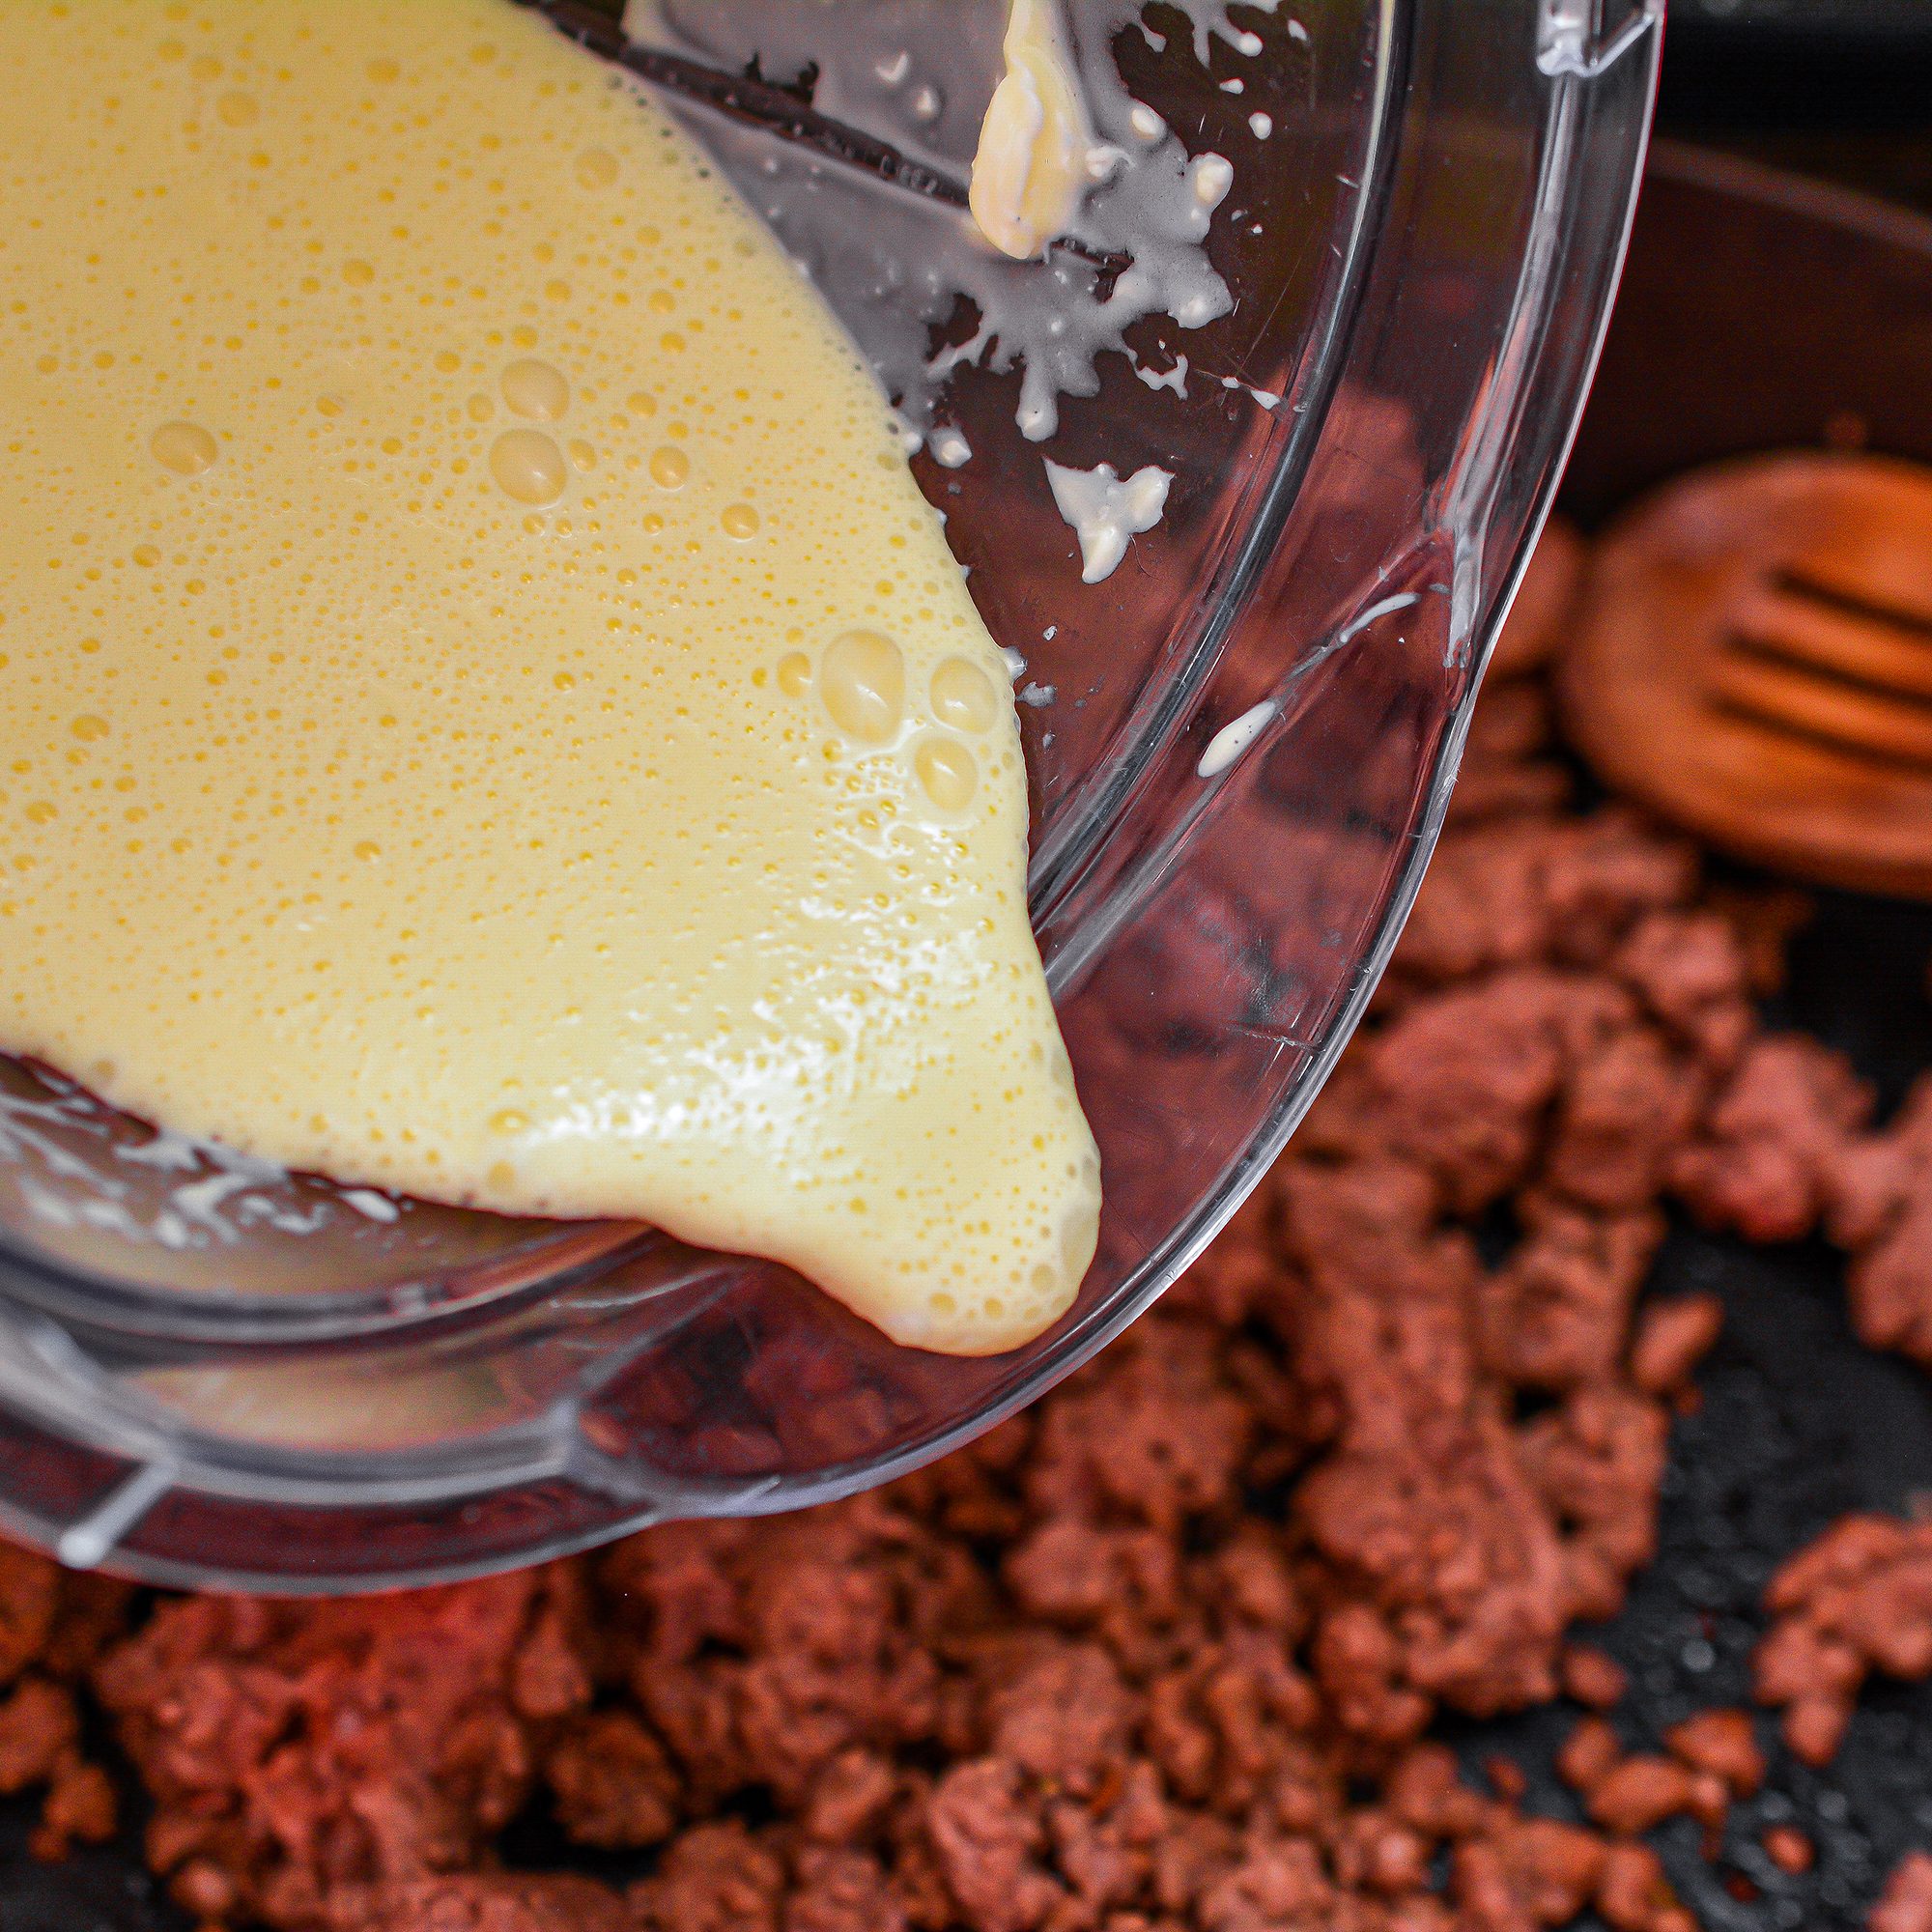 Pour the cream cheese sauce over the ground beef